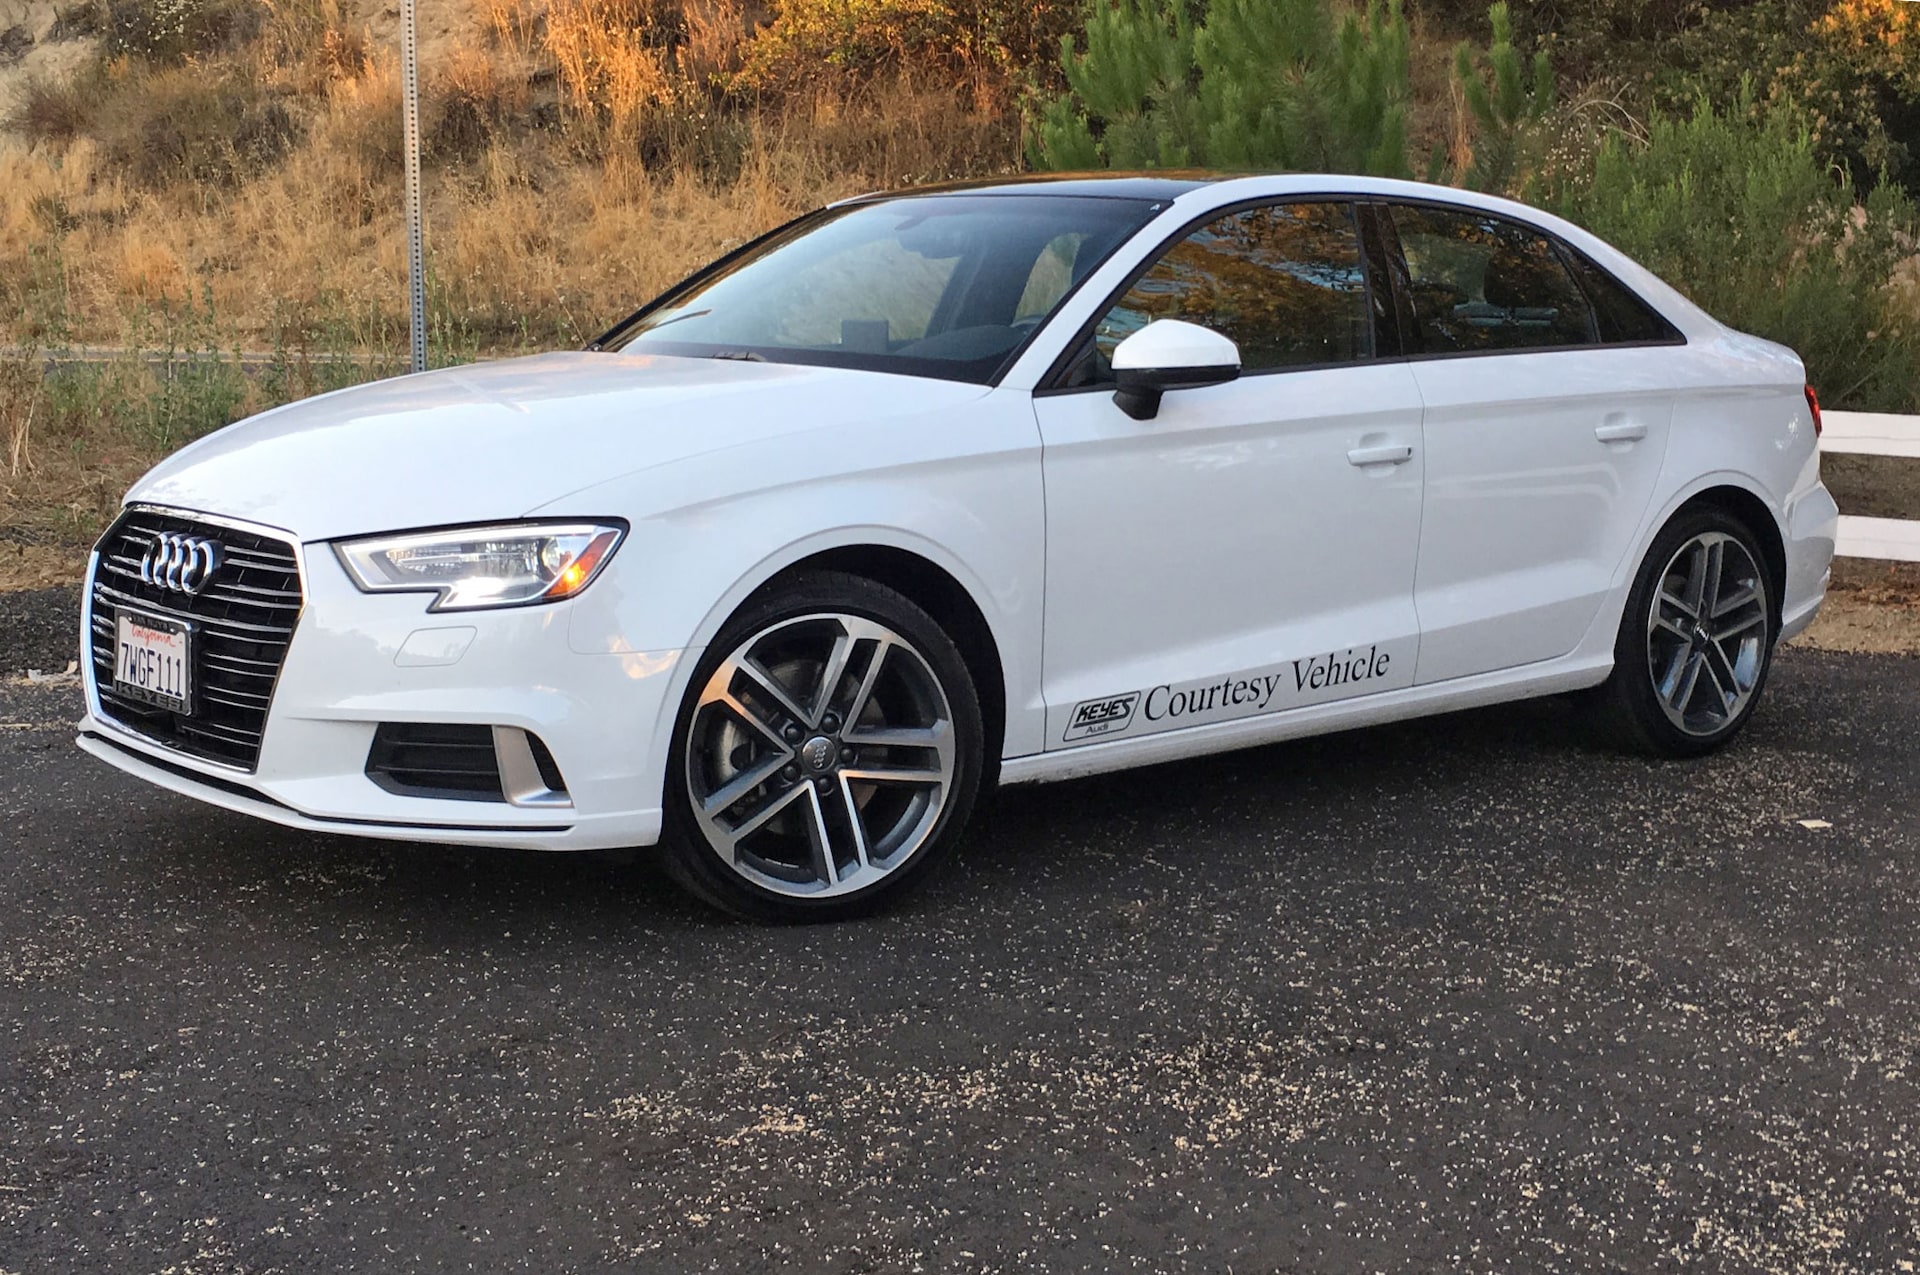 2017 Audi A3 2.0T FWD Review: 7 Things to Know